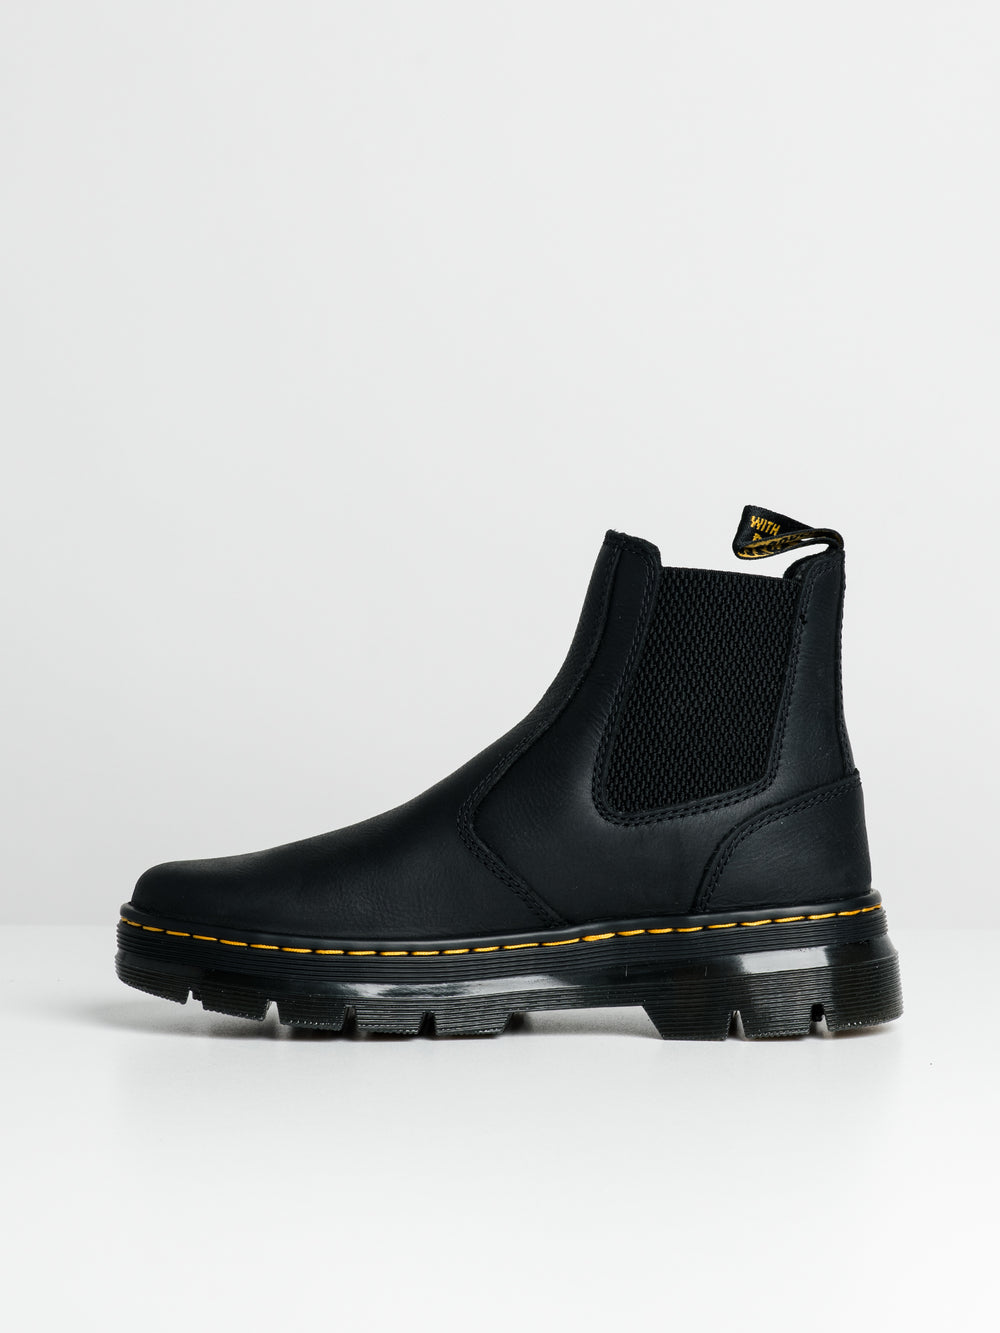 MENS DR MARTENS WYOMING BOOT